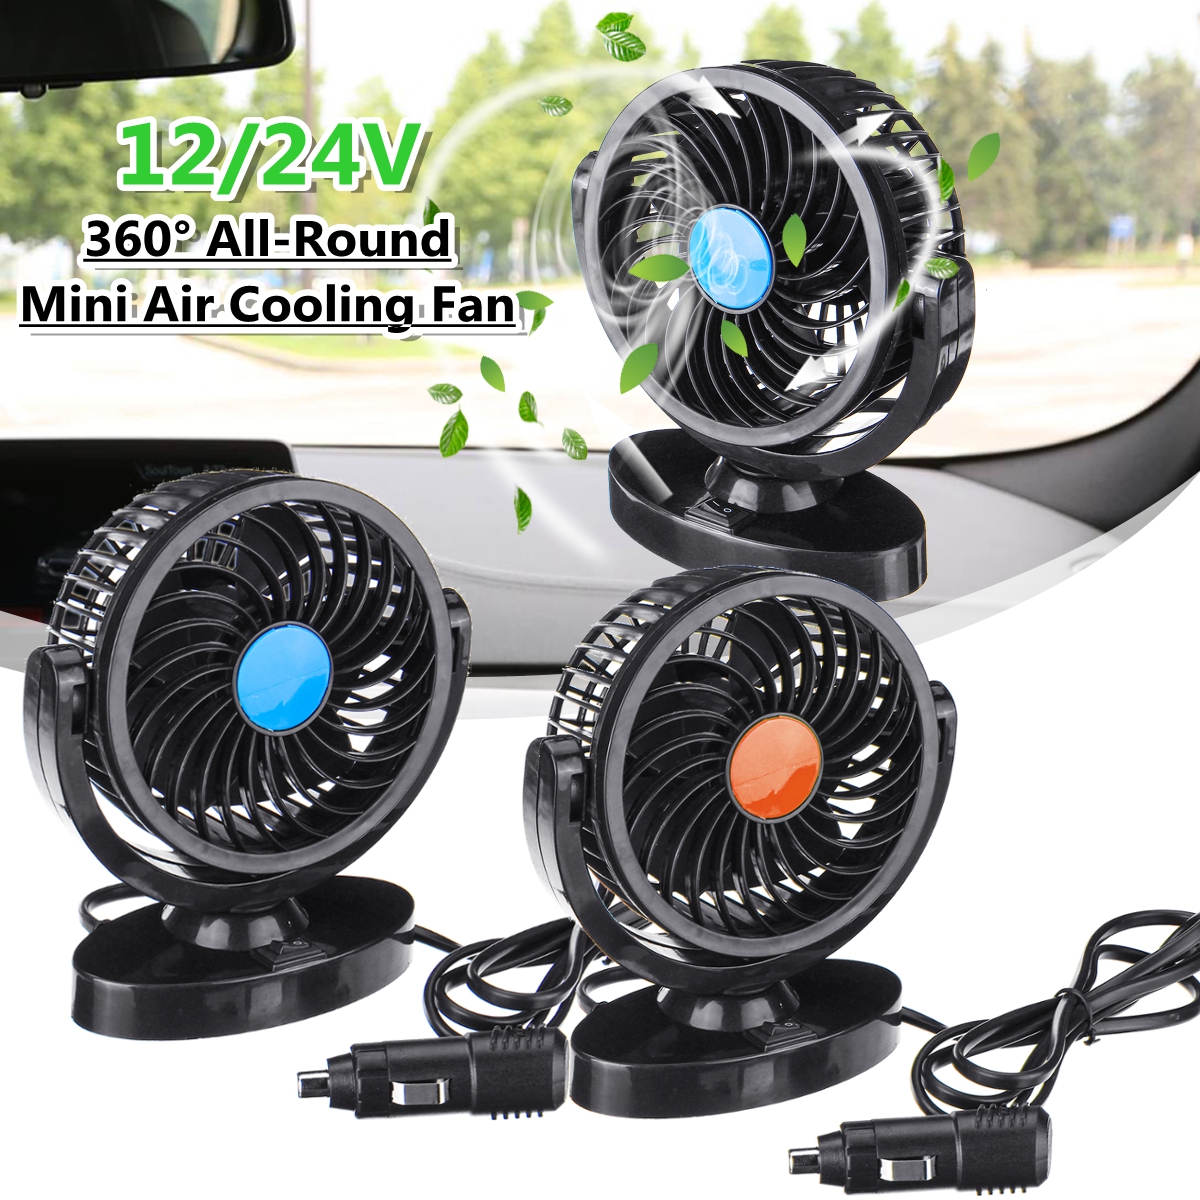 DC-12V24V-360deg-All-Round-Mini-Auto-Air-Cooling-Fan-Adjustable-Low-Noise-1466573-1